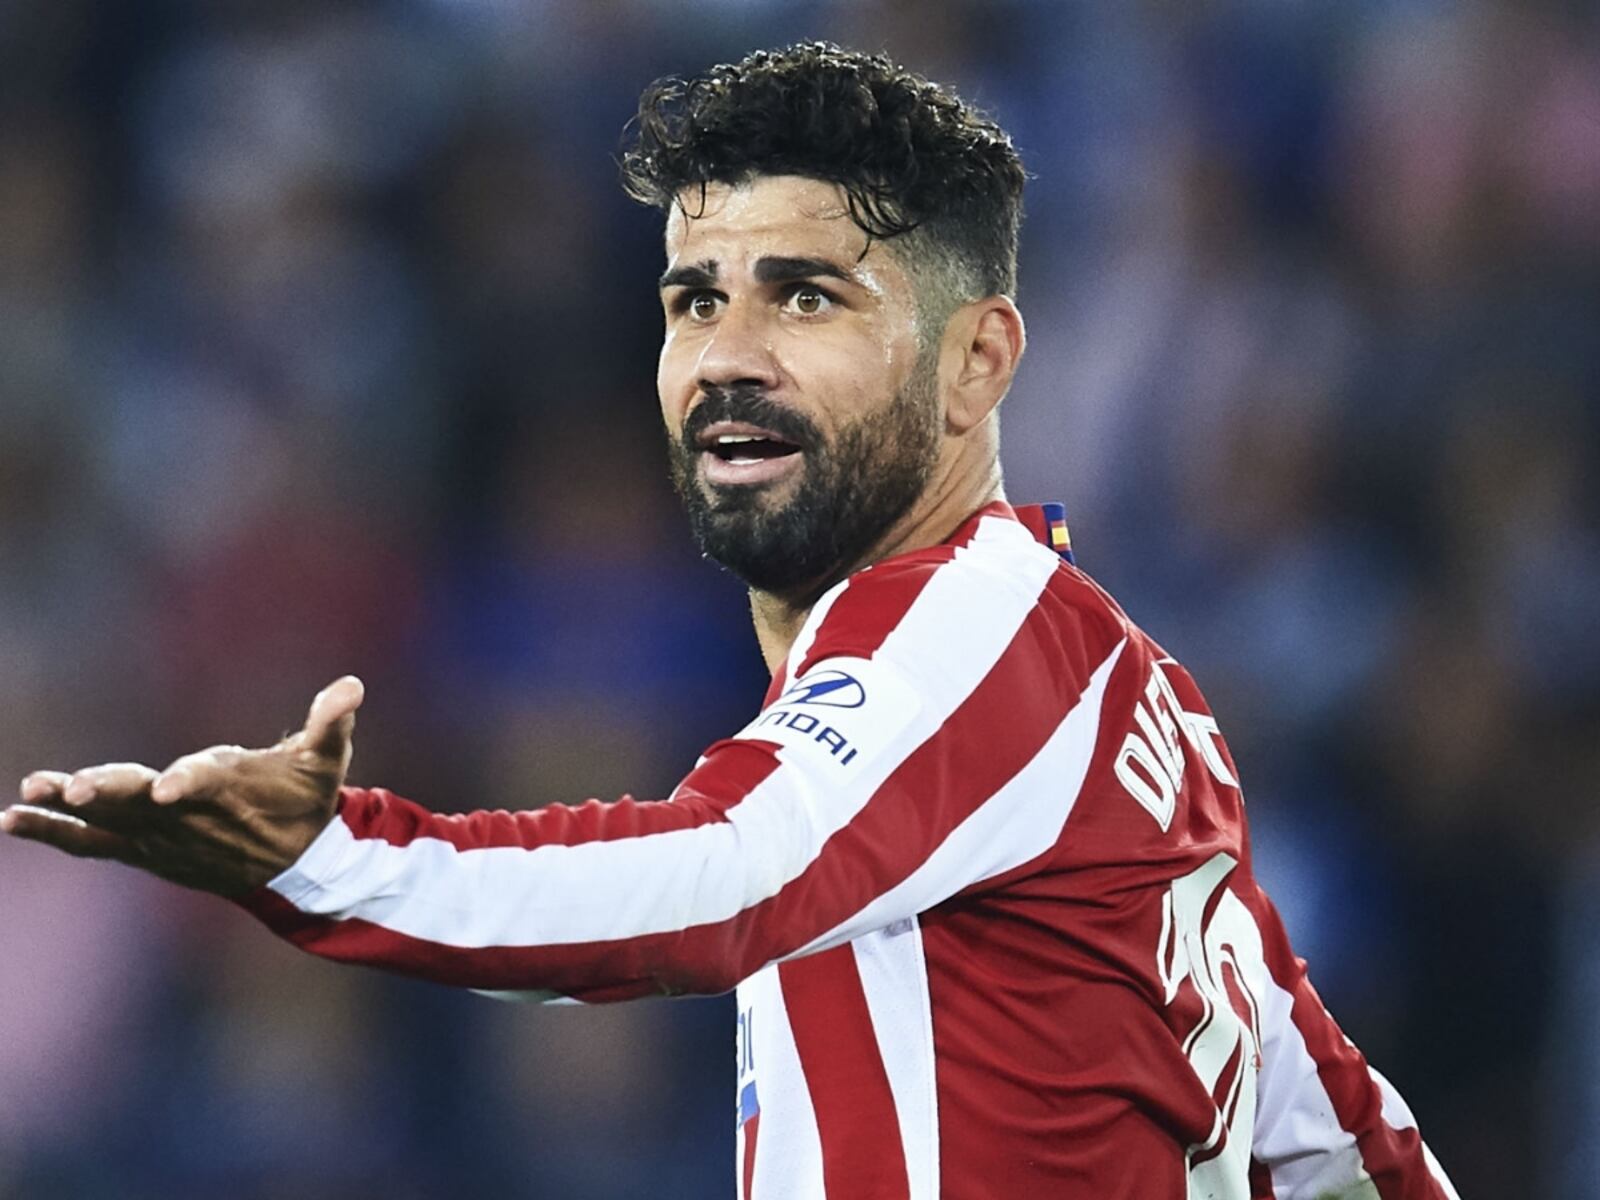 Diego Costa will continue his career outside of the 5 major European leagues